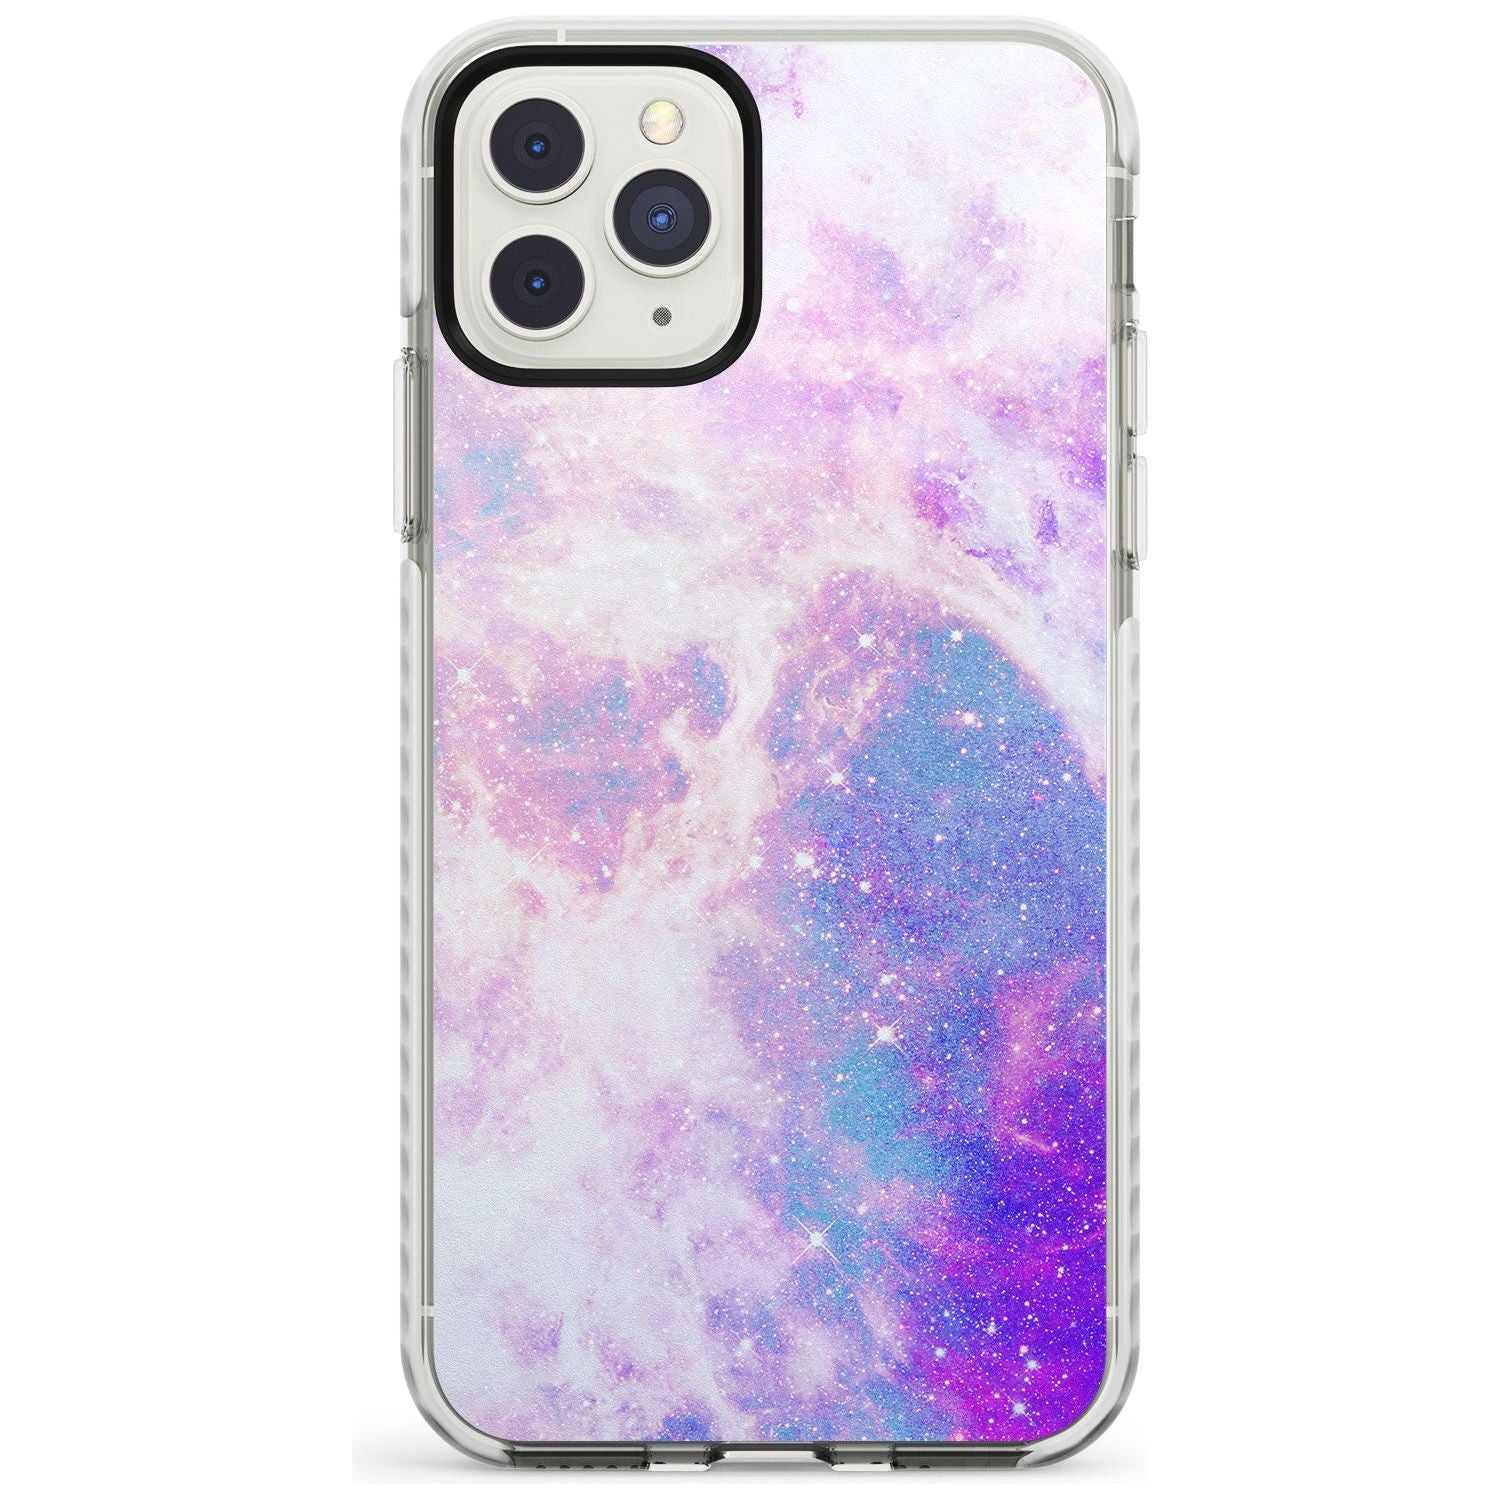 Purple & Blue Galaxy Pattern Design Impact Phone Case for iPhone 11 Pro Max